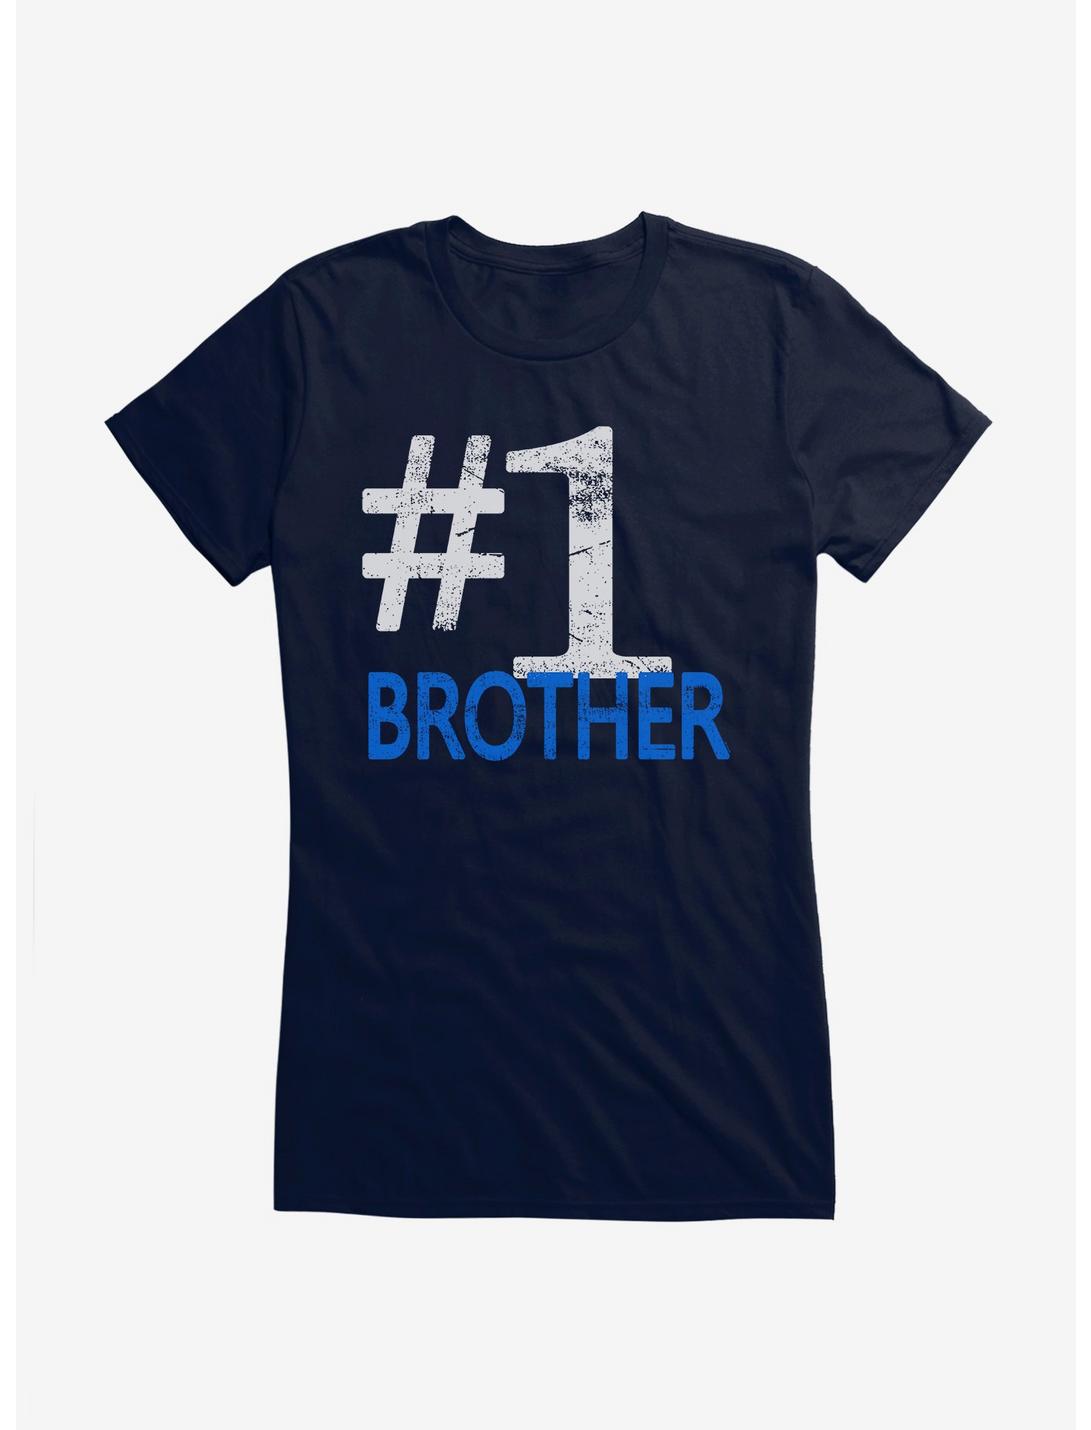 iCreate Number 1 Brother Girls T-Shirt, , hi-res